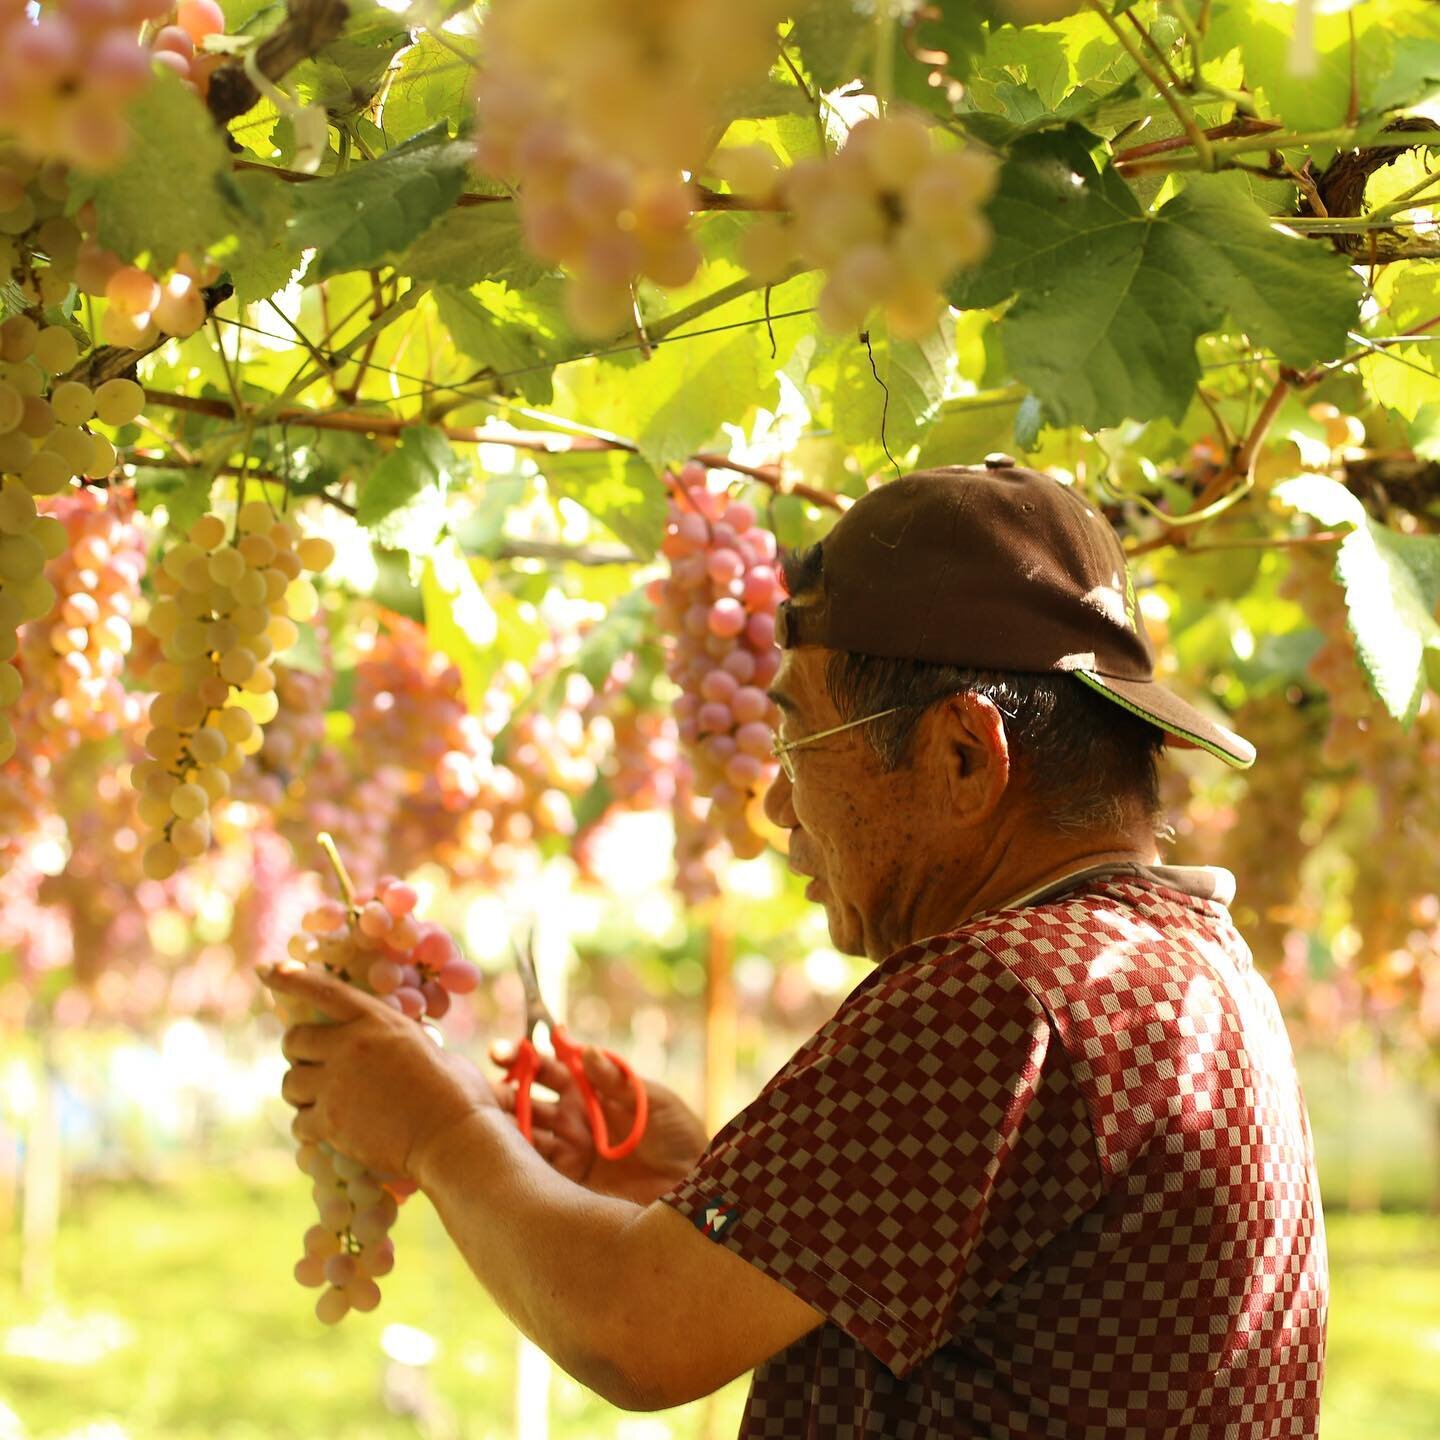 The #Koshu harvest started early this year and is now in full swing in the #KoshuValley. The overhead vine canopies provide some shade from the sun and the autumn breeze takes the edge off the heat.
.
.
.
#harvest #grapeharvest #japanesewine #koshuwi